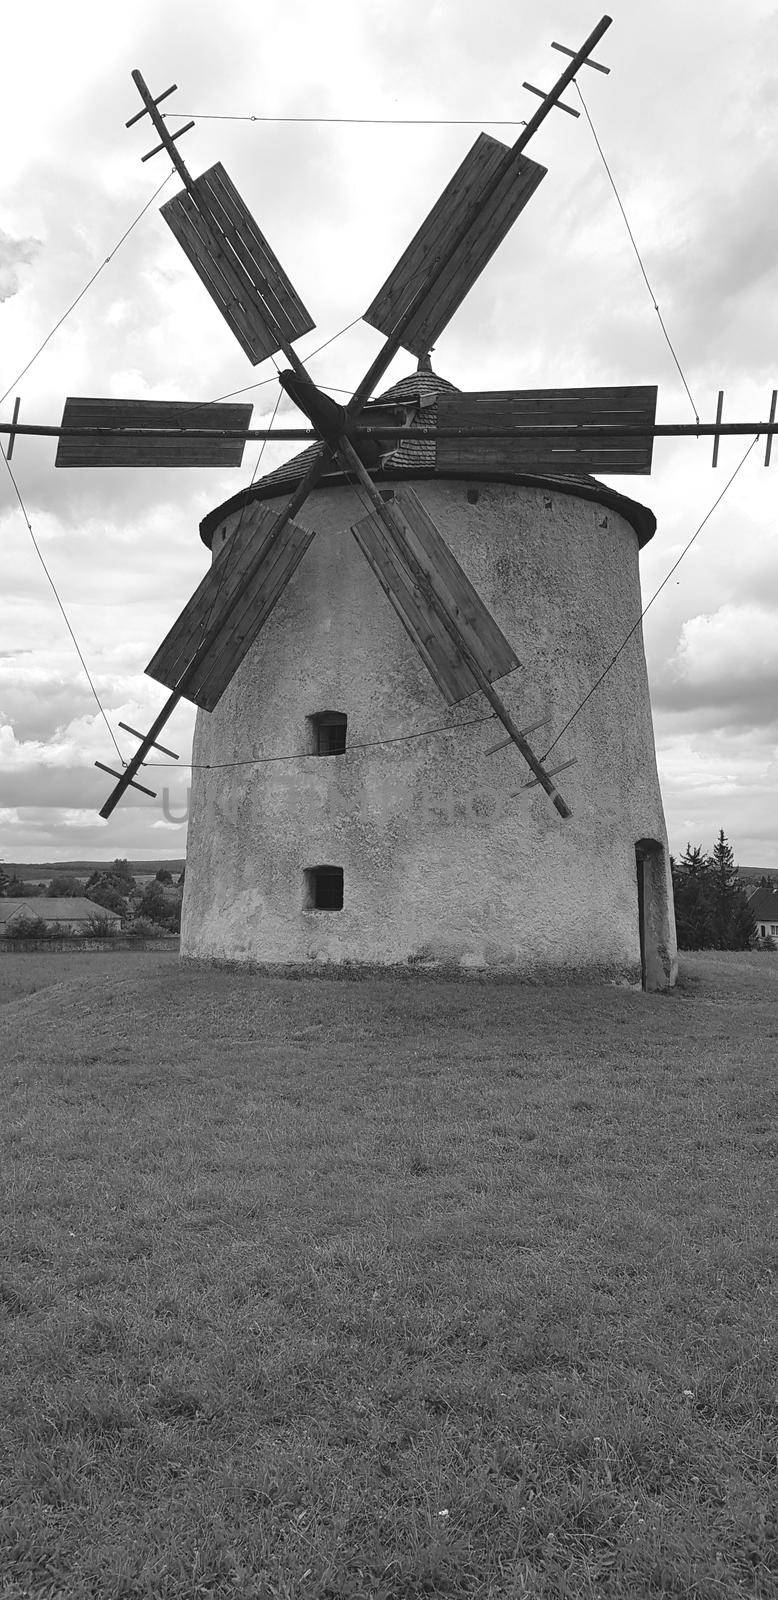 Black and white photo with an old windmill sitting in a field with a cloudy sky by banate